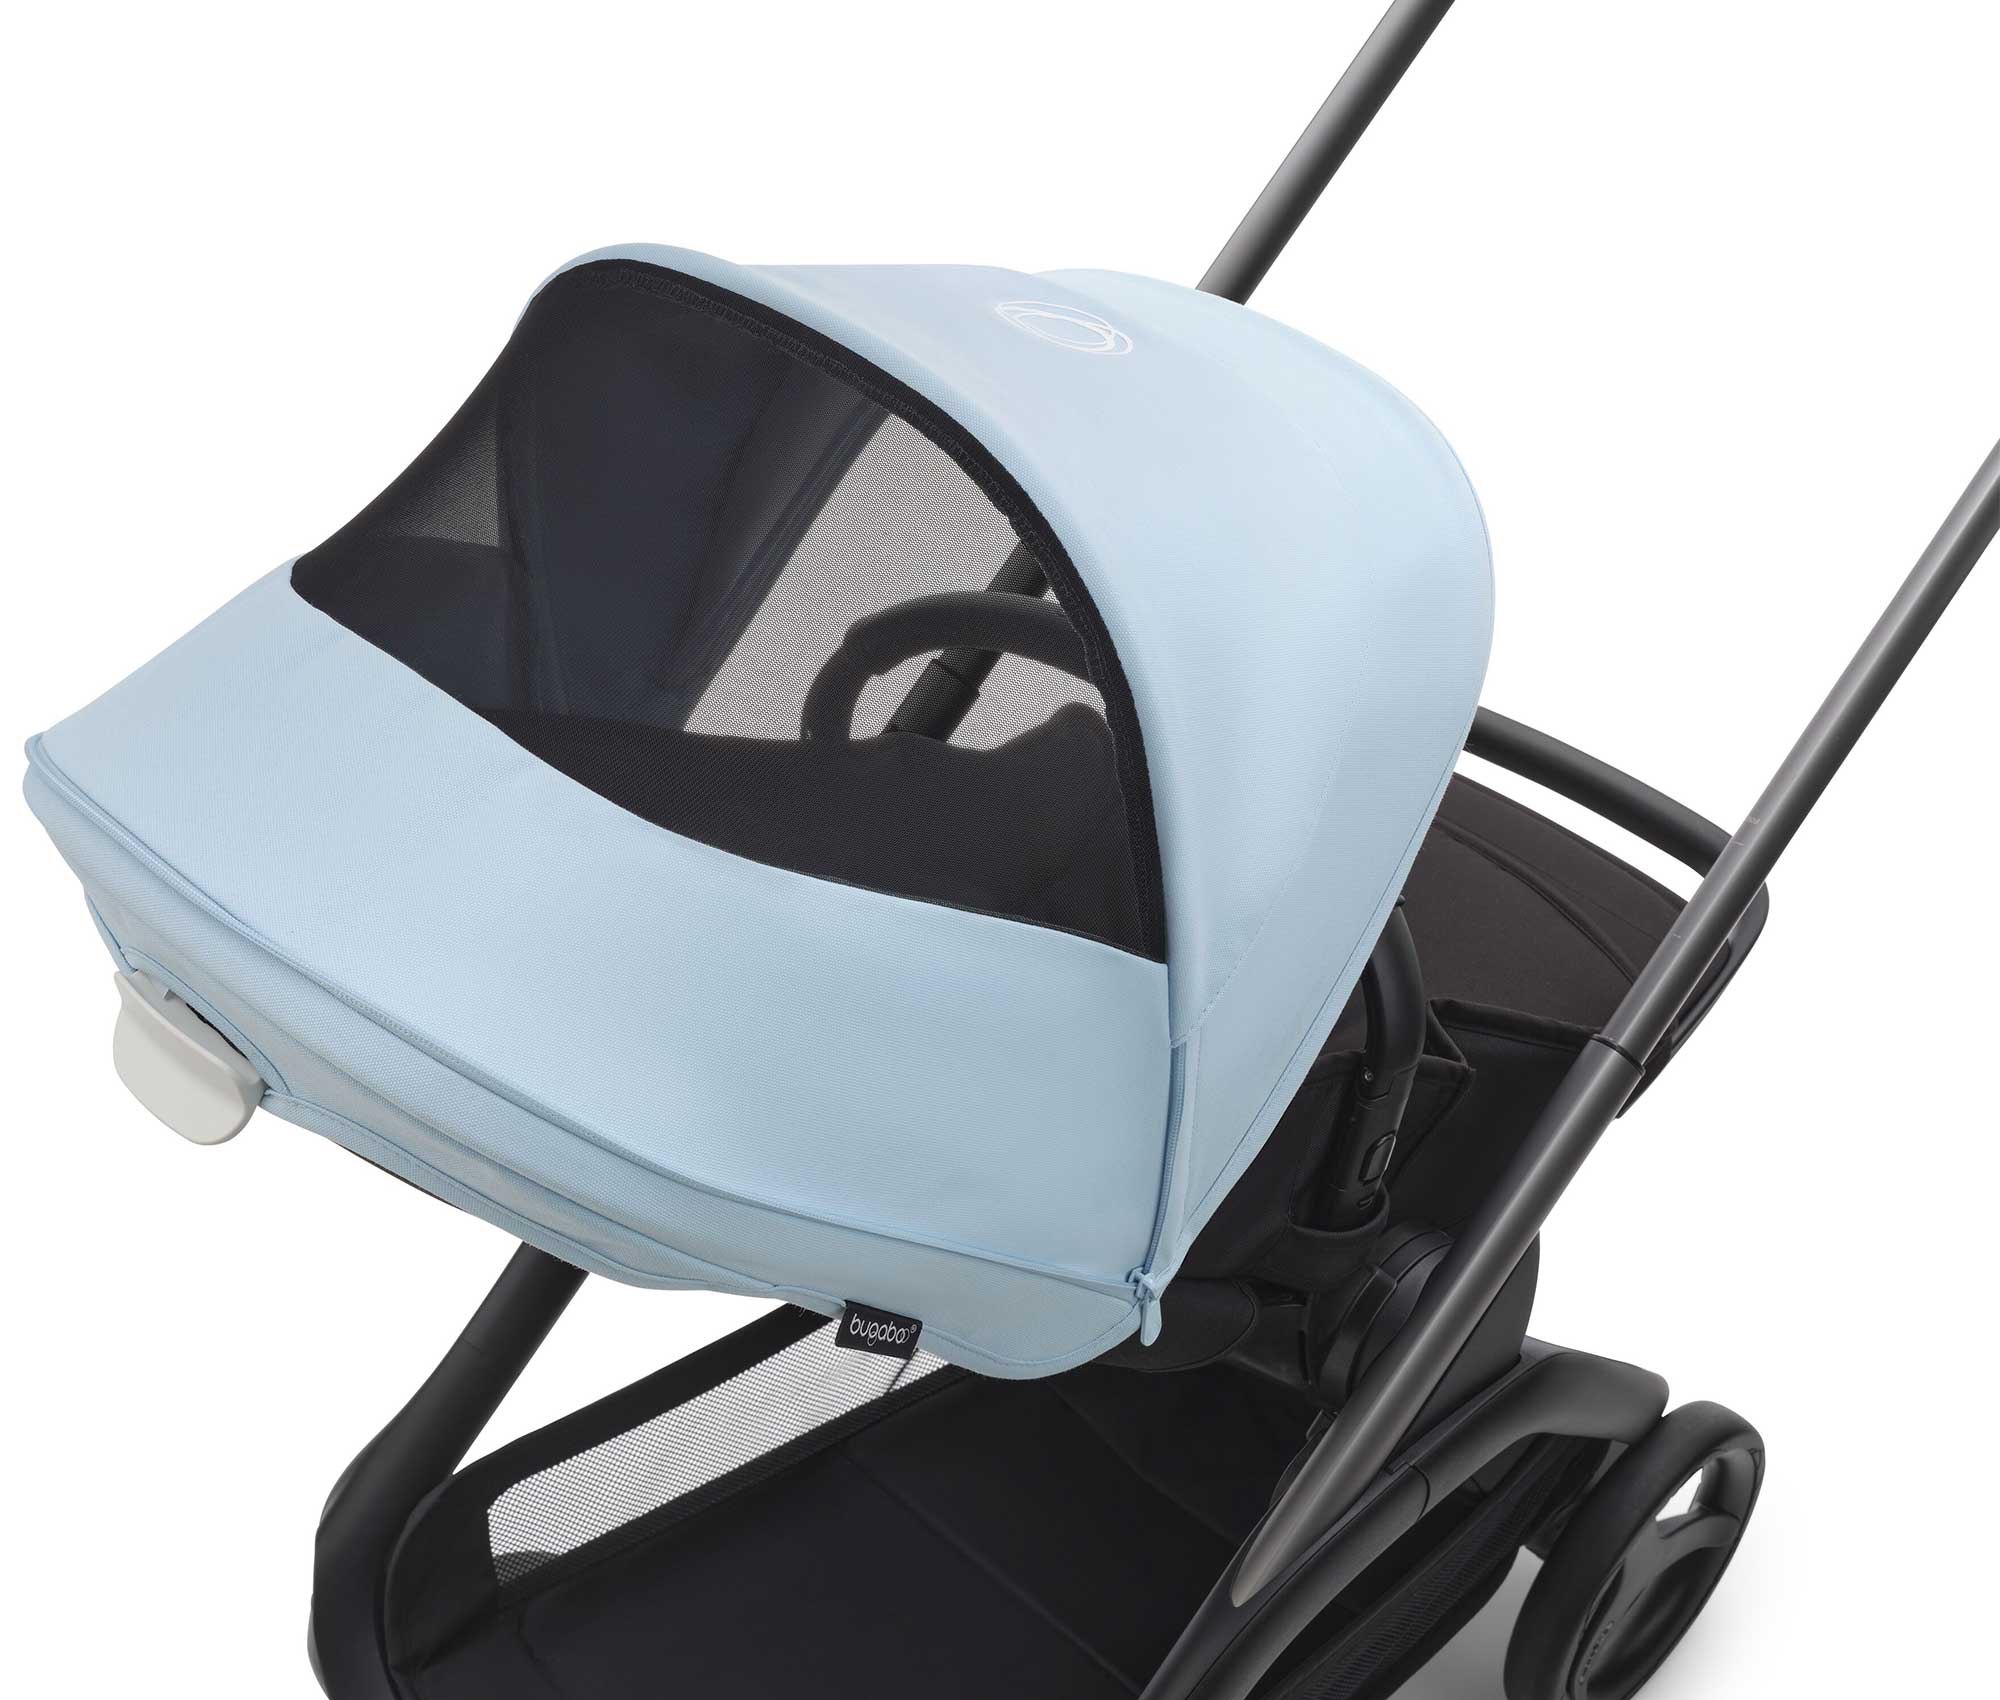 Bugaboo Pushchairs & Buggies Bugaboo Dragonfly Complete Pushchair in Graphite/Midnight Black/Skyline Blue 100176028